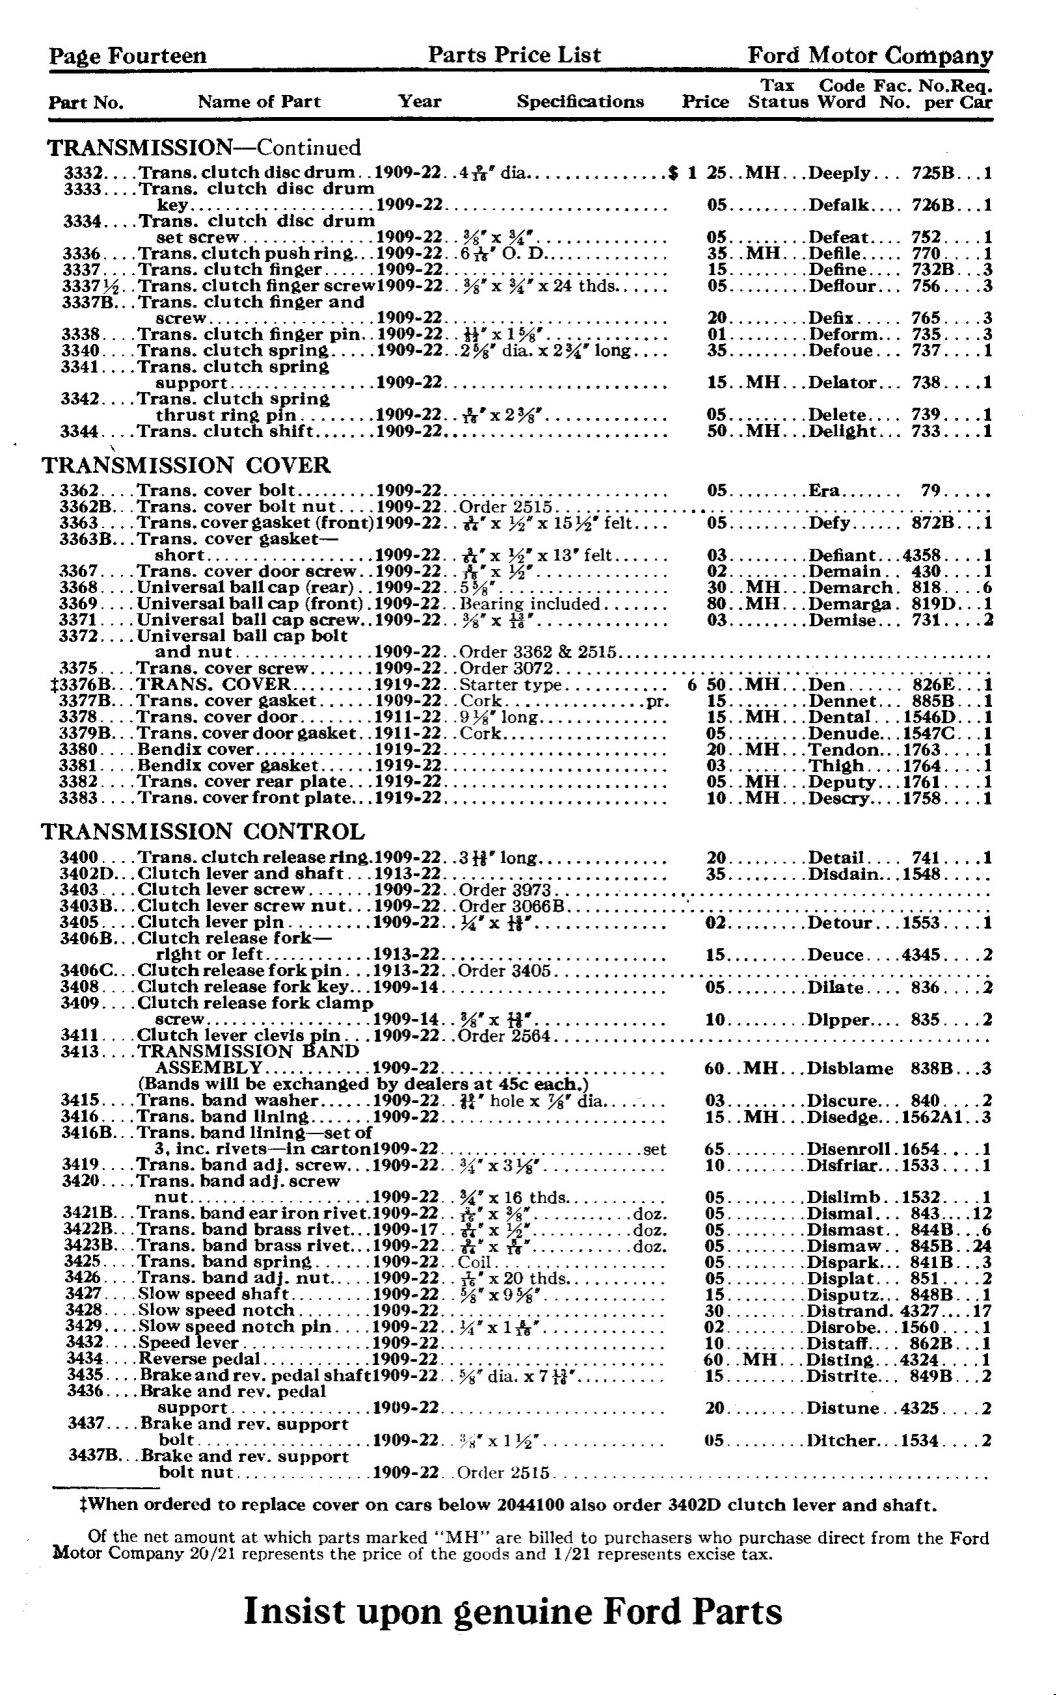 1922_Ford_Parts_List-15